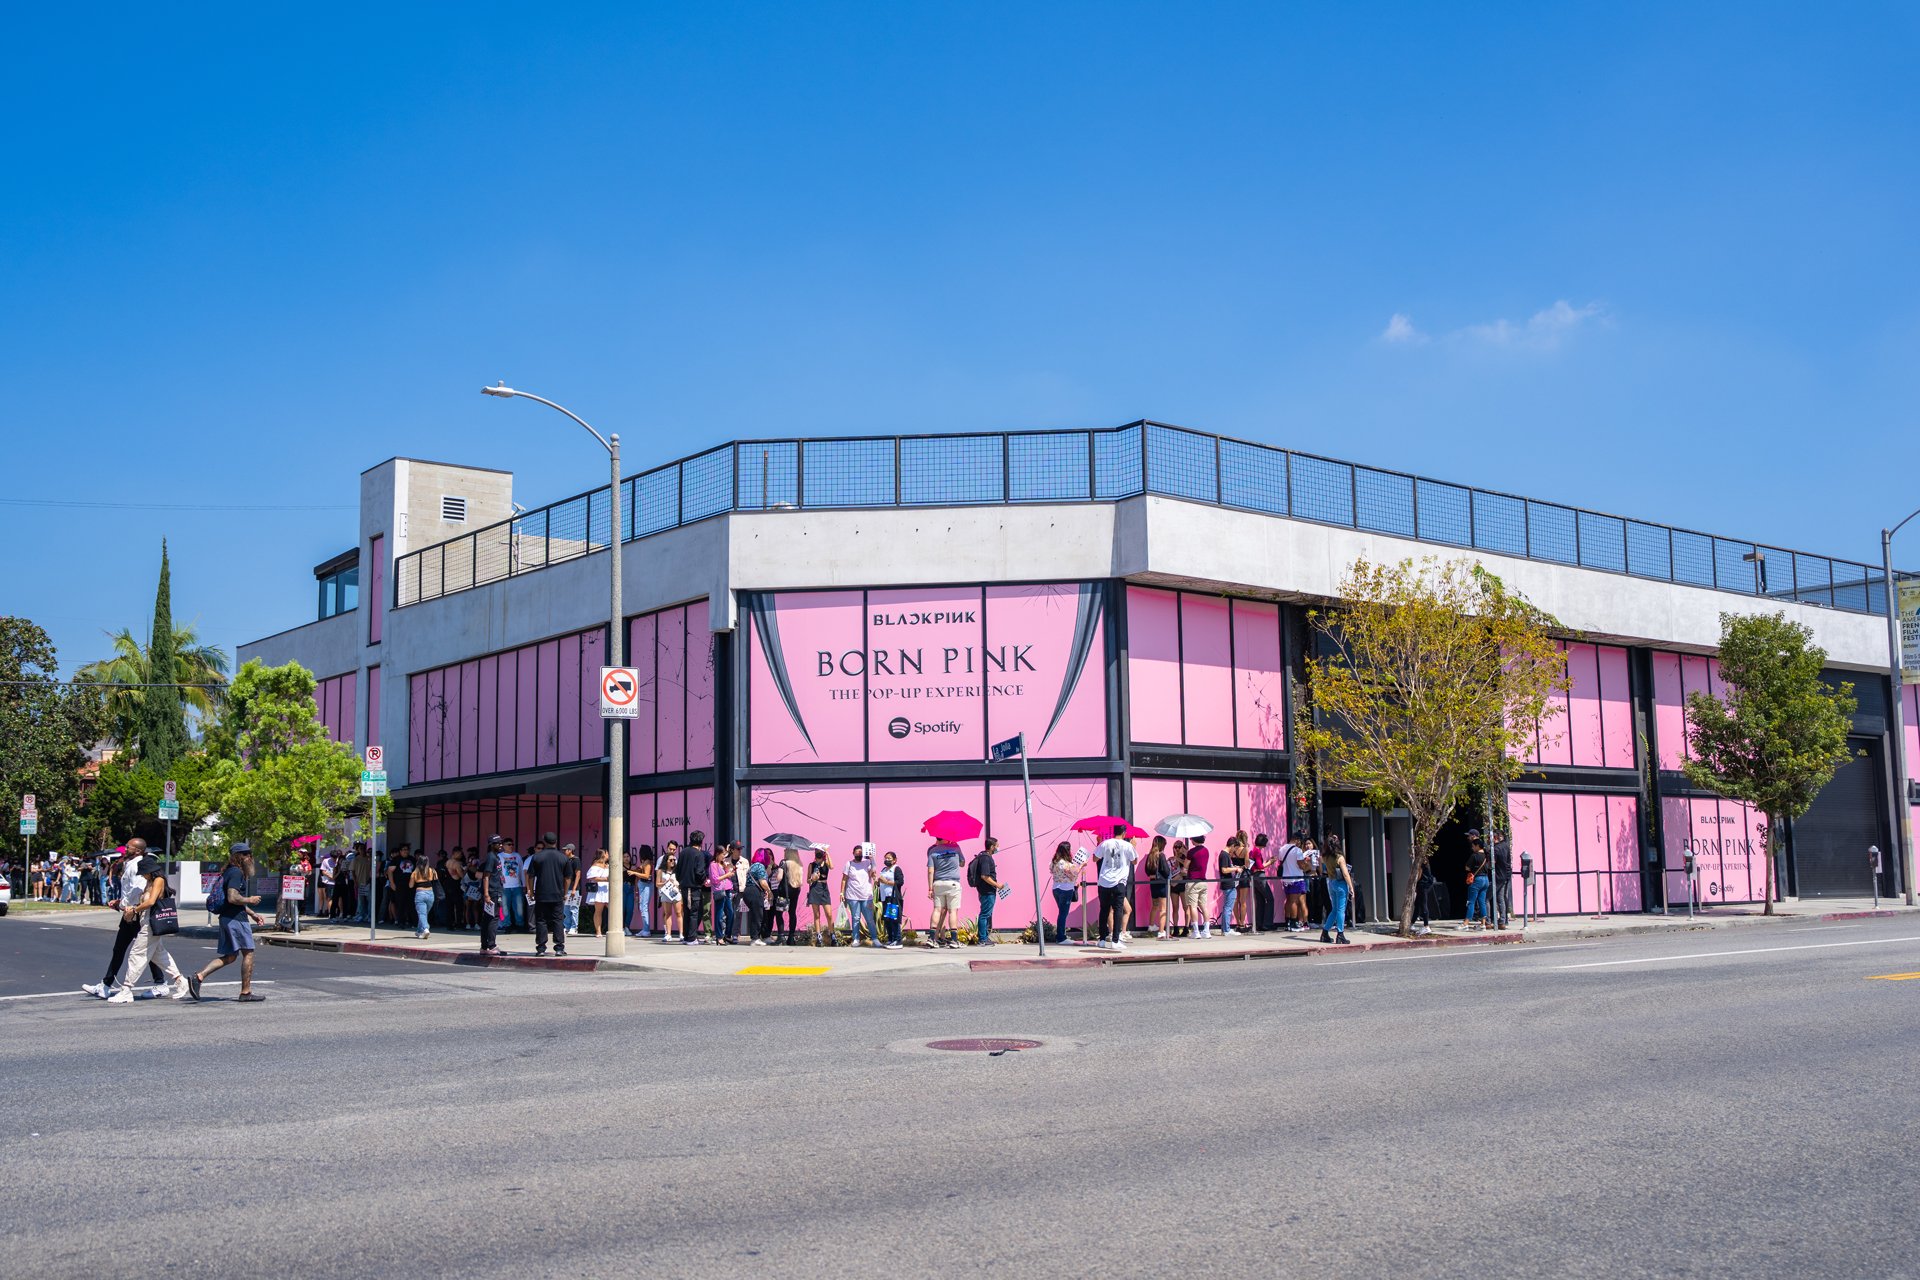 BORN PINK: The Pop-Up Experience in LA 